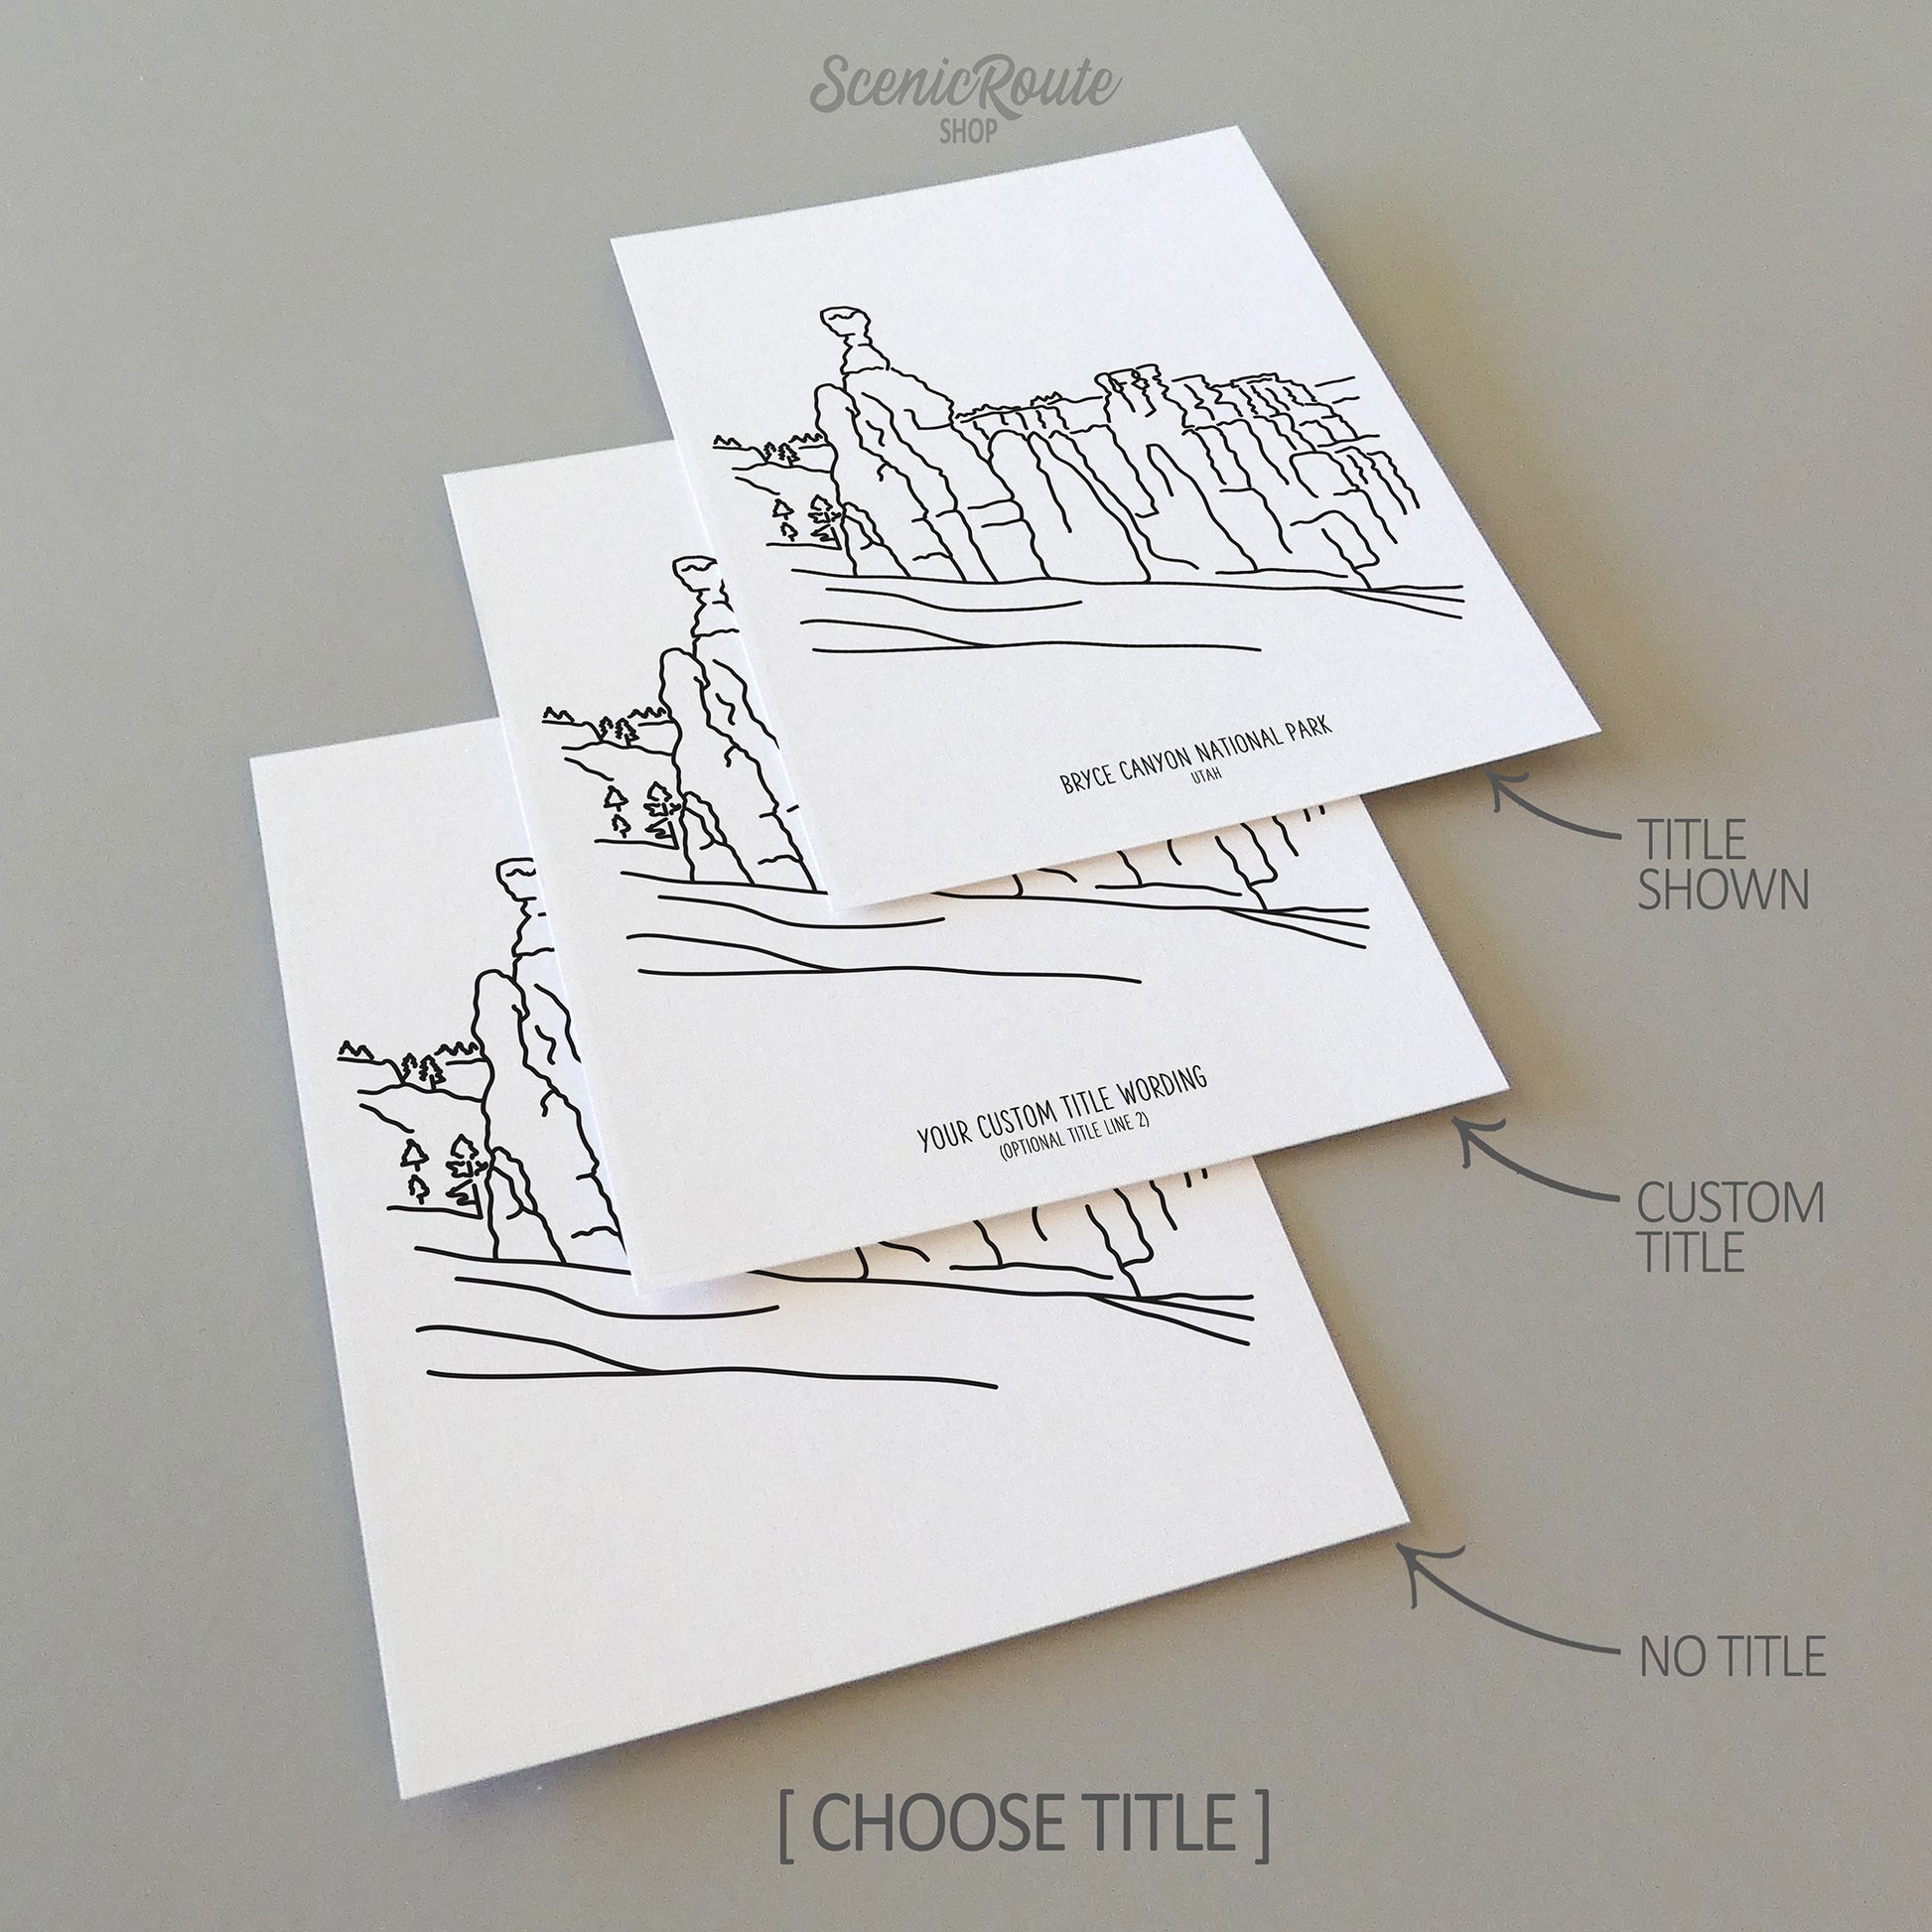 Three line art drawings of Bryce Canyon National Park on white linen paper with a gray background. The pieces are shown with title options that can be chosen and personalized.